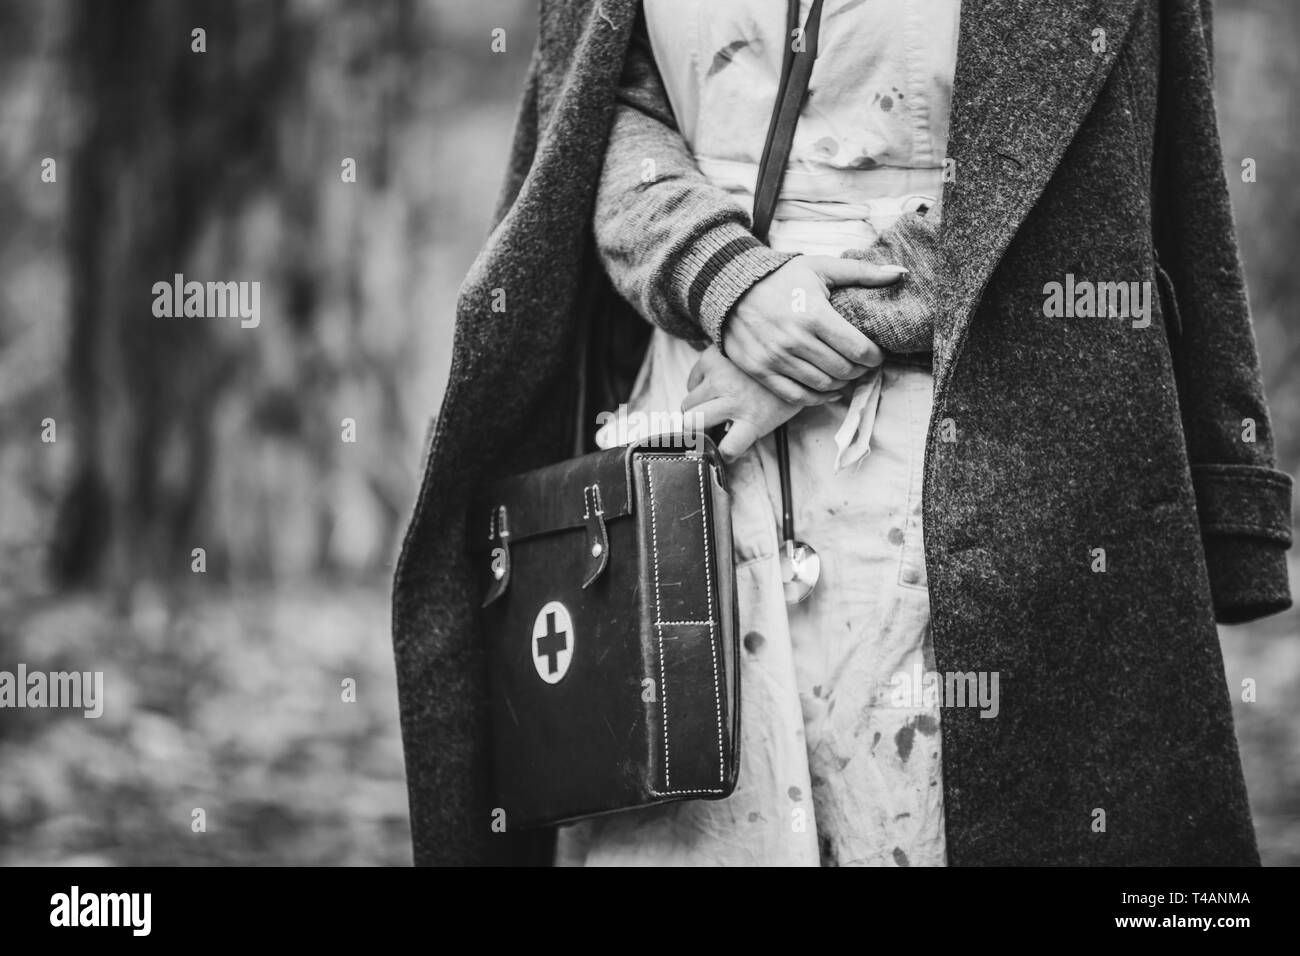 Re-enactor Wears Historical German Nurse Paramedic Of World War II Uniform With First Aid Kit. Photo In Black And White Colors. WWII WW2. Stock Photo